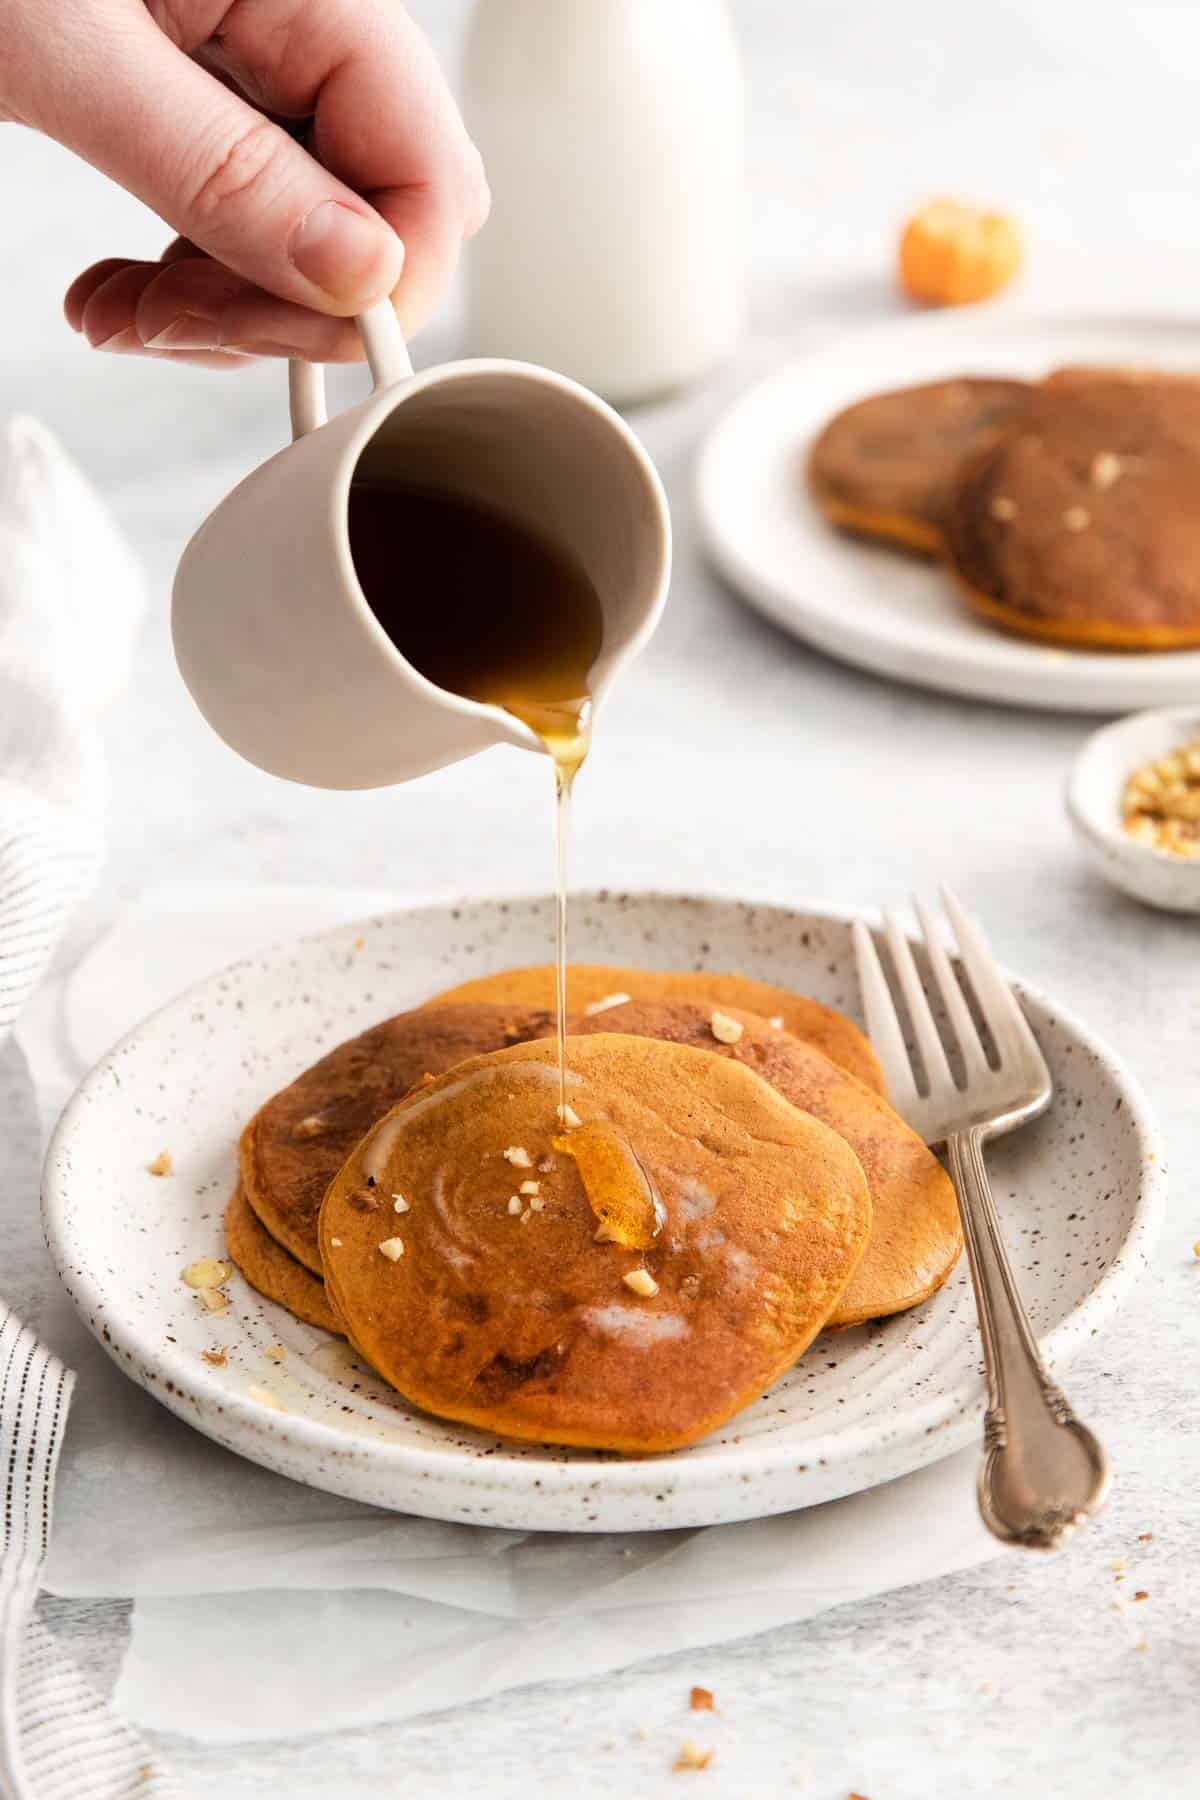 Pumpkin pancakes on a plate, and a hand pouring syrup over the top